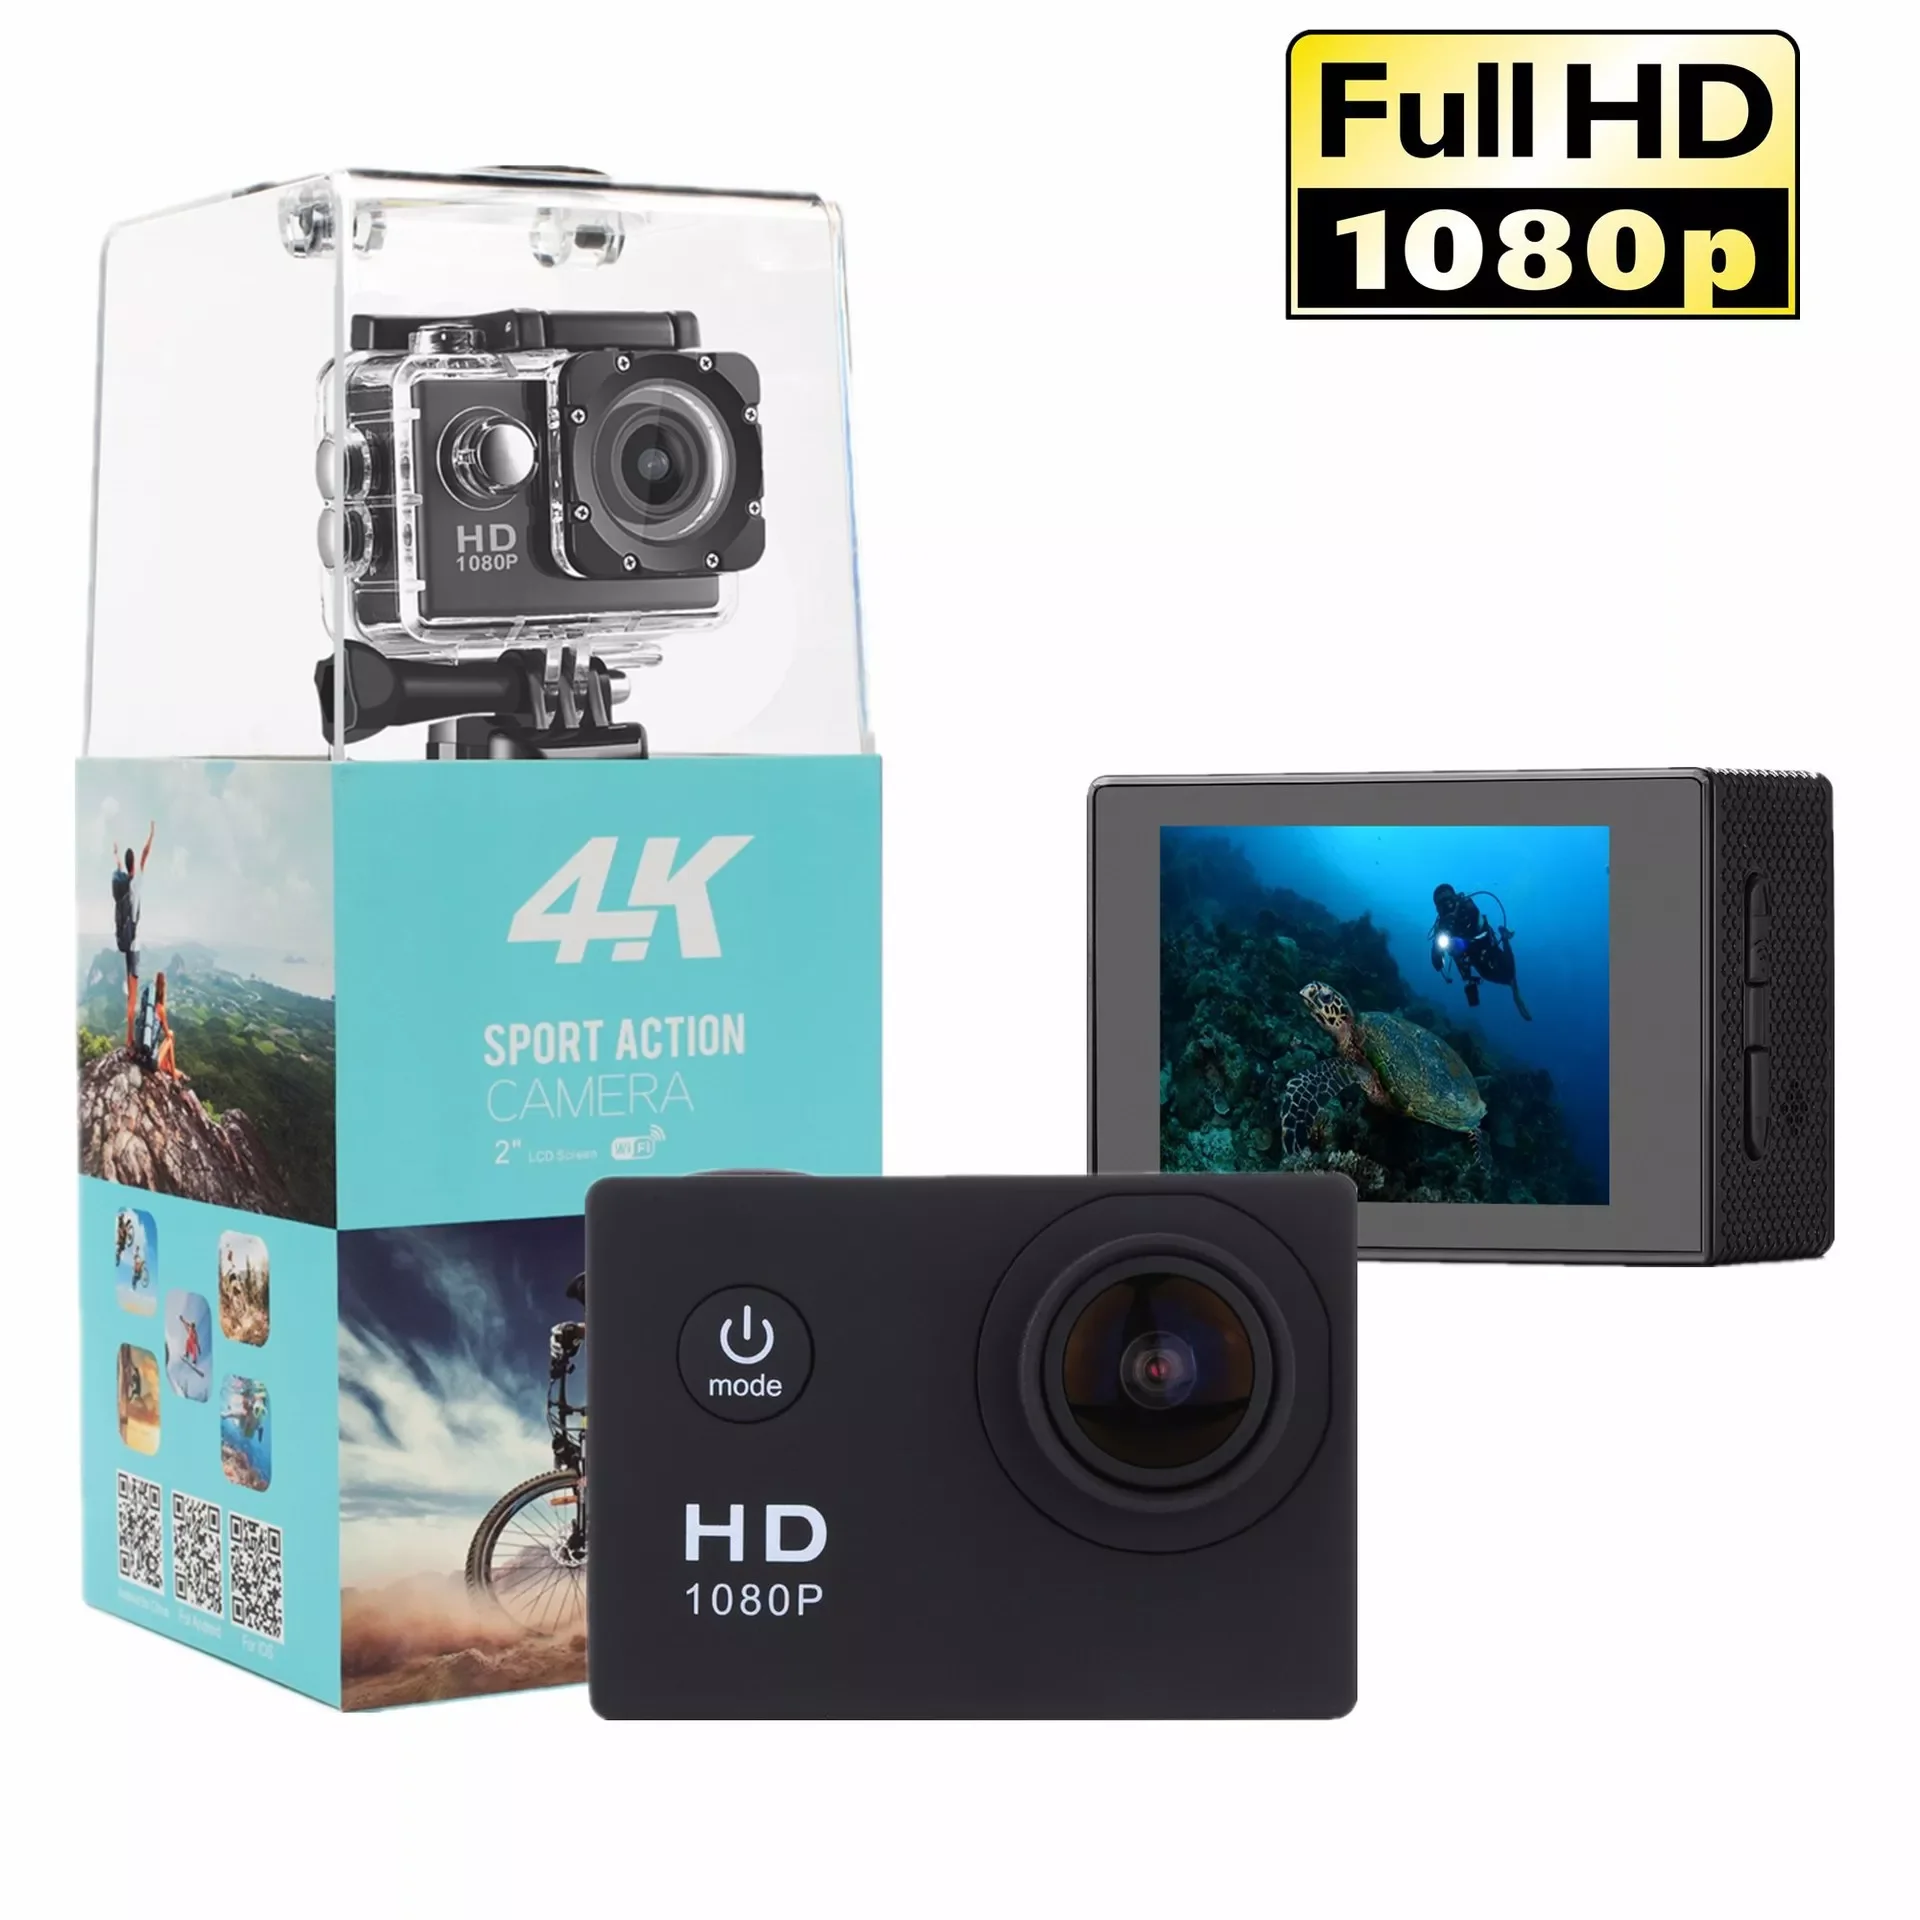 Waterproof 4 k double screen with remote WIFI outdoor sports DV camera diving aerial high-definition cameras enlarge